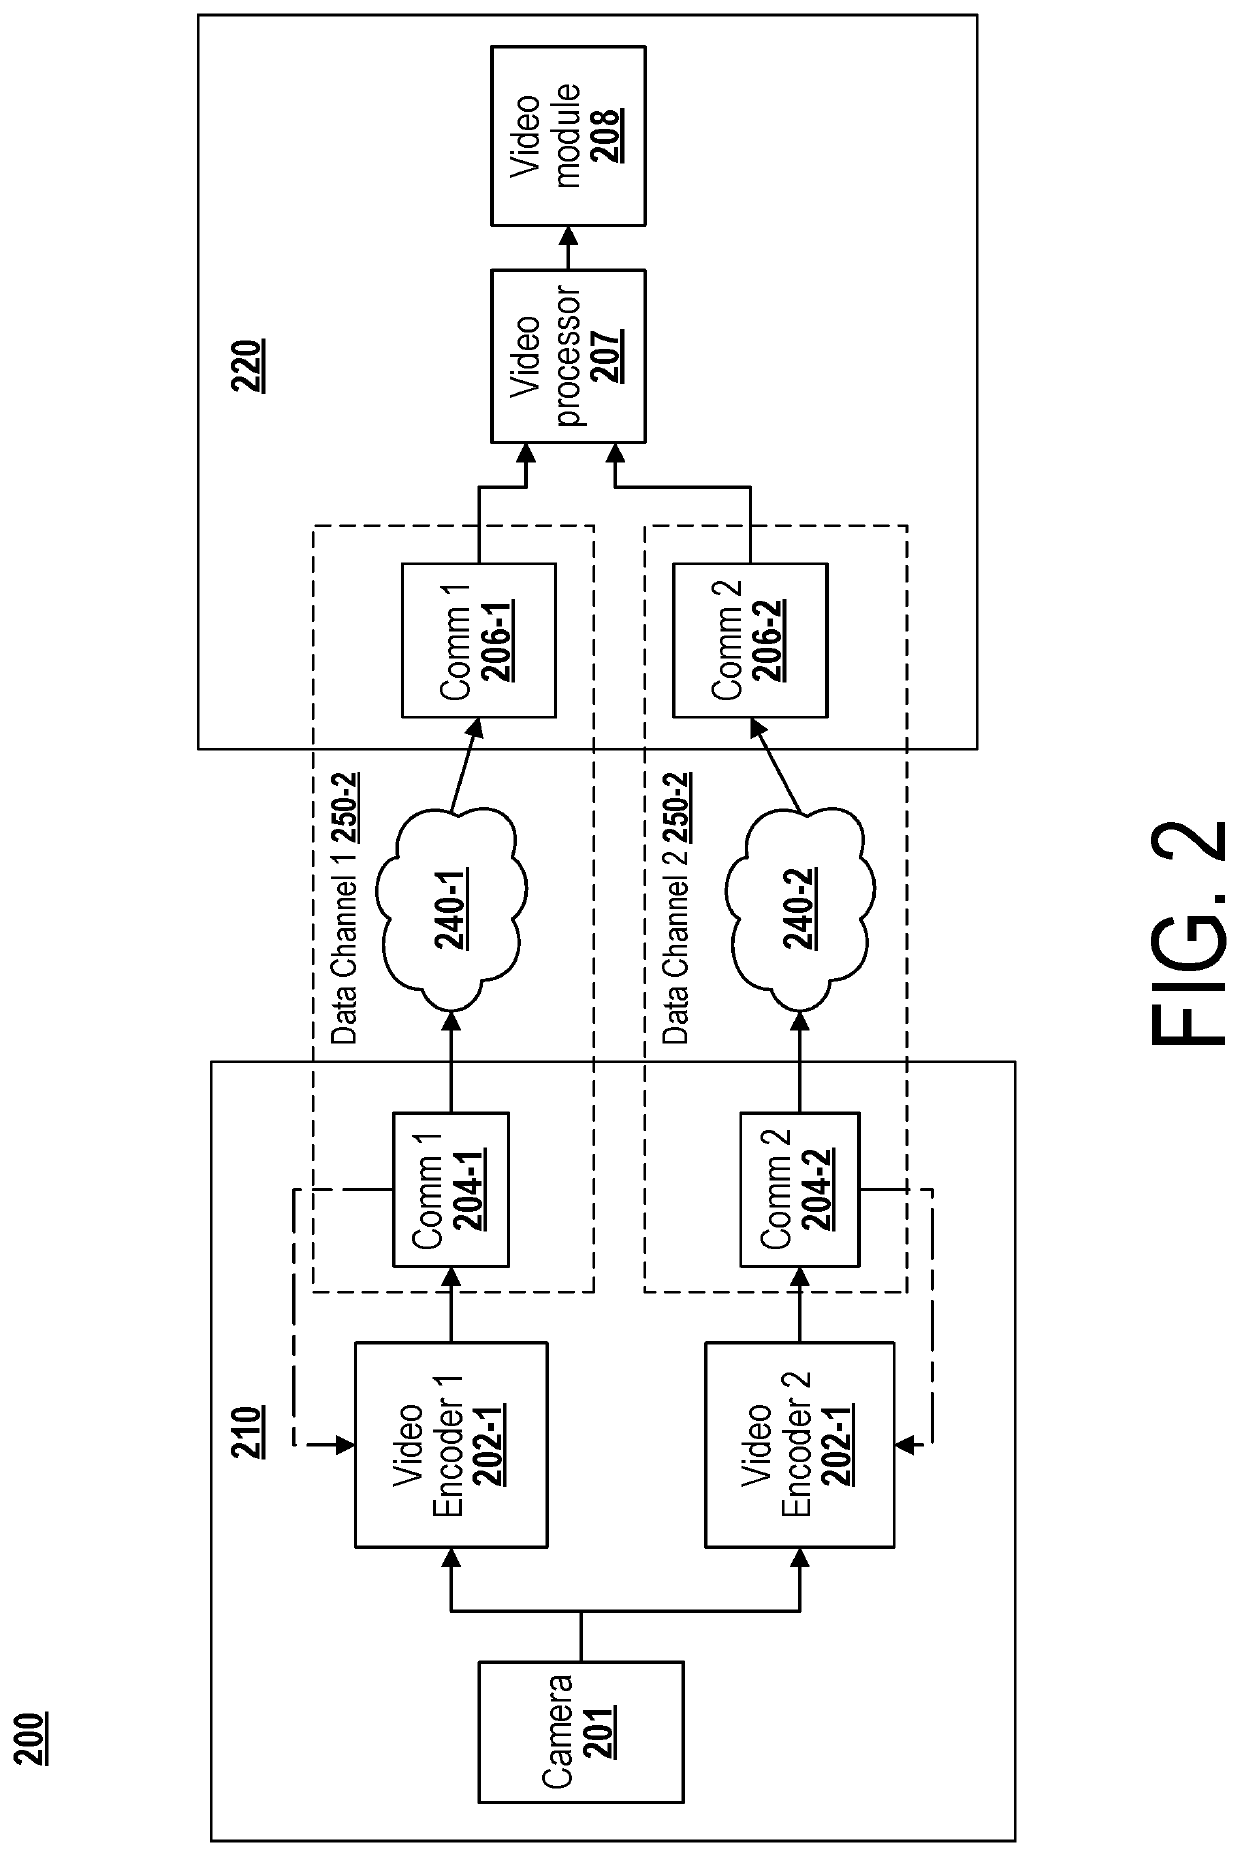 Low latency wireless communication system for teleoperated vehicle environments